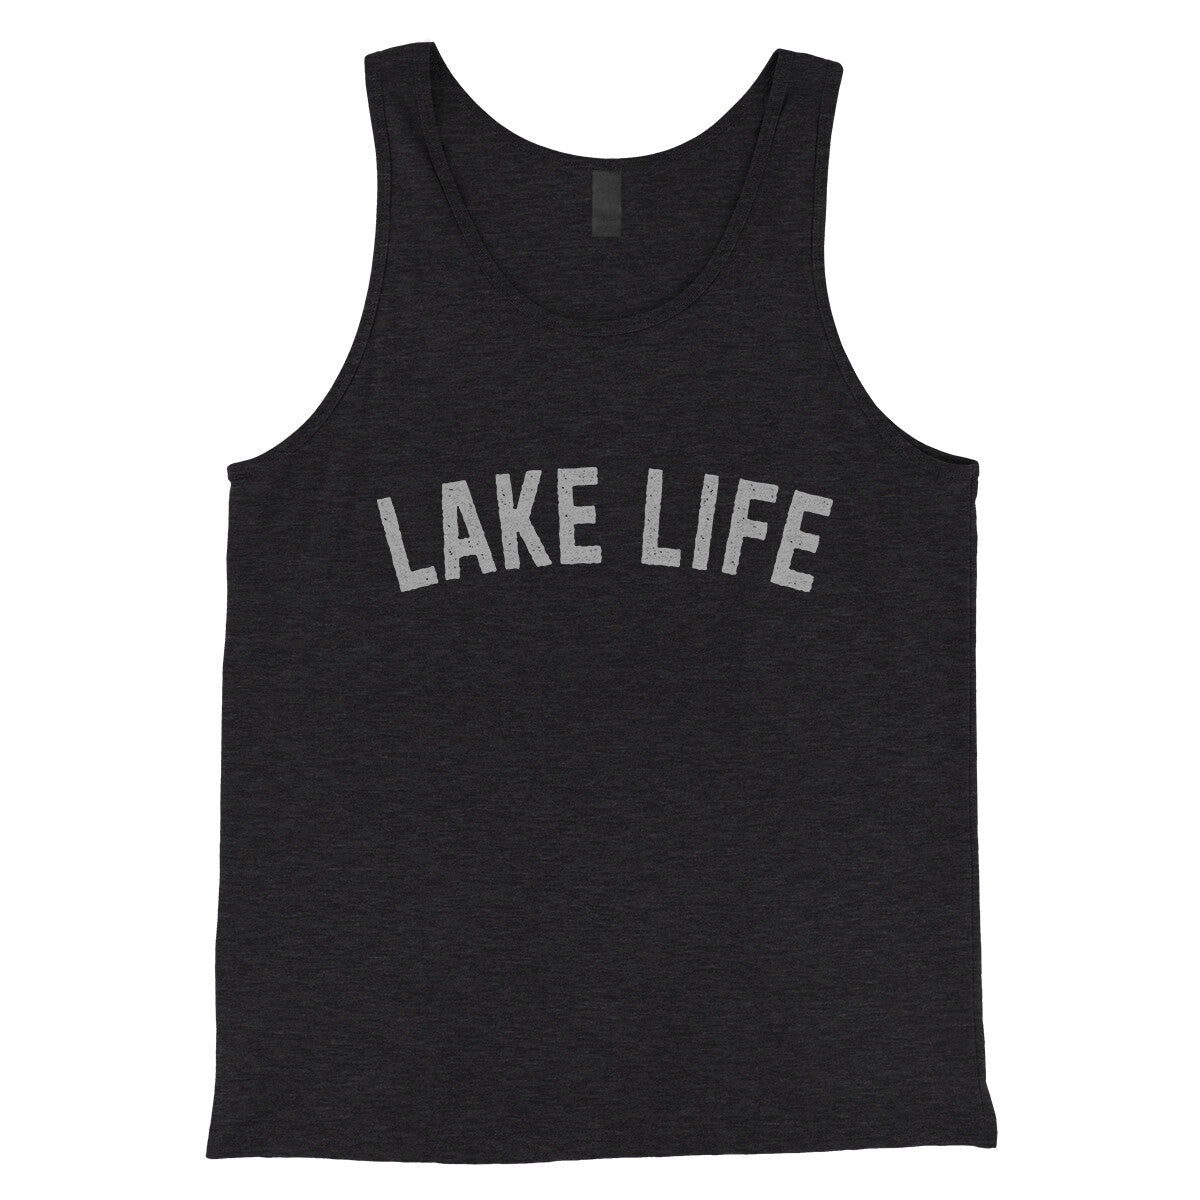 Lake Life in Charcoal Black TriBlend Color